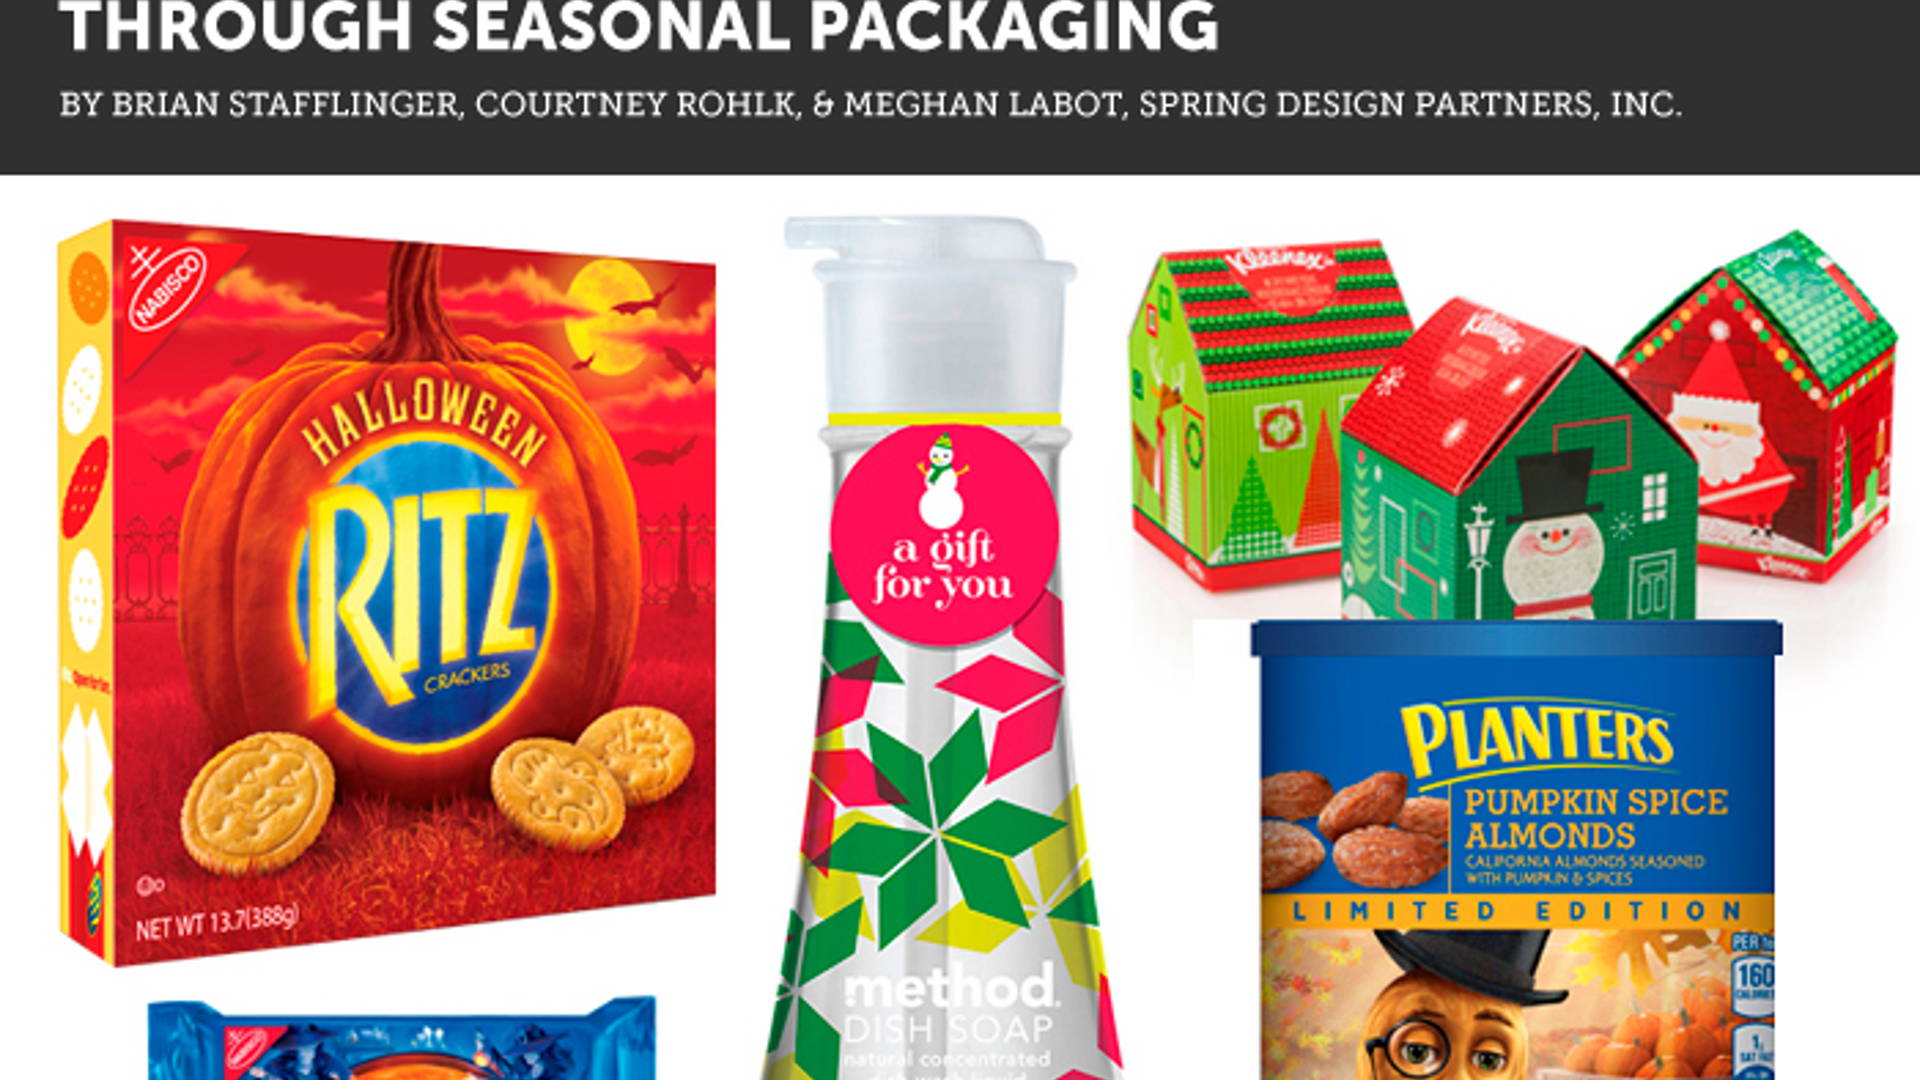 Featured image for Building Brand Equity Through Seasonal Packaging 